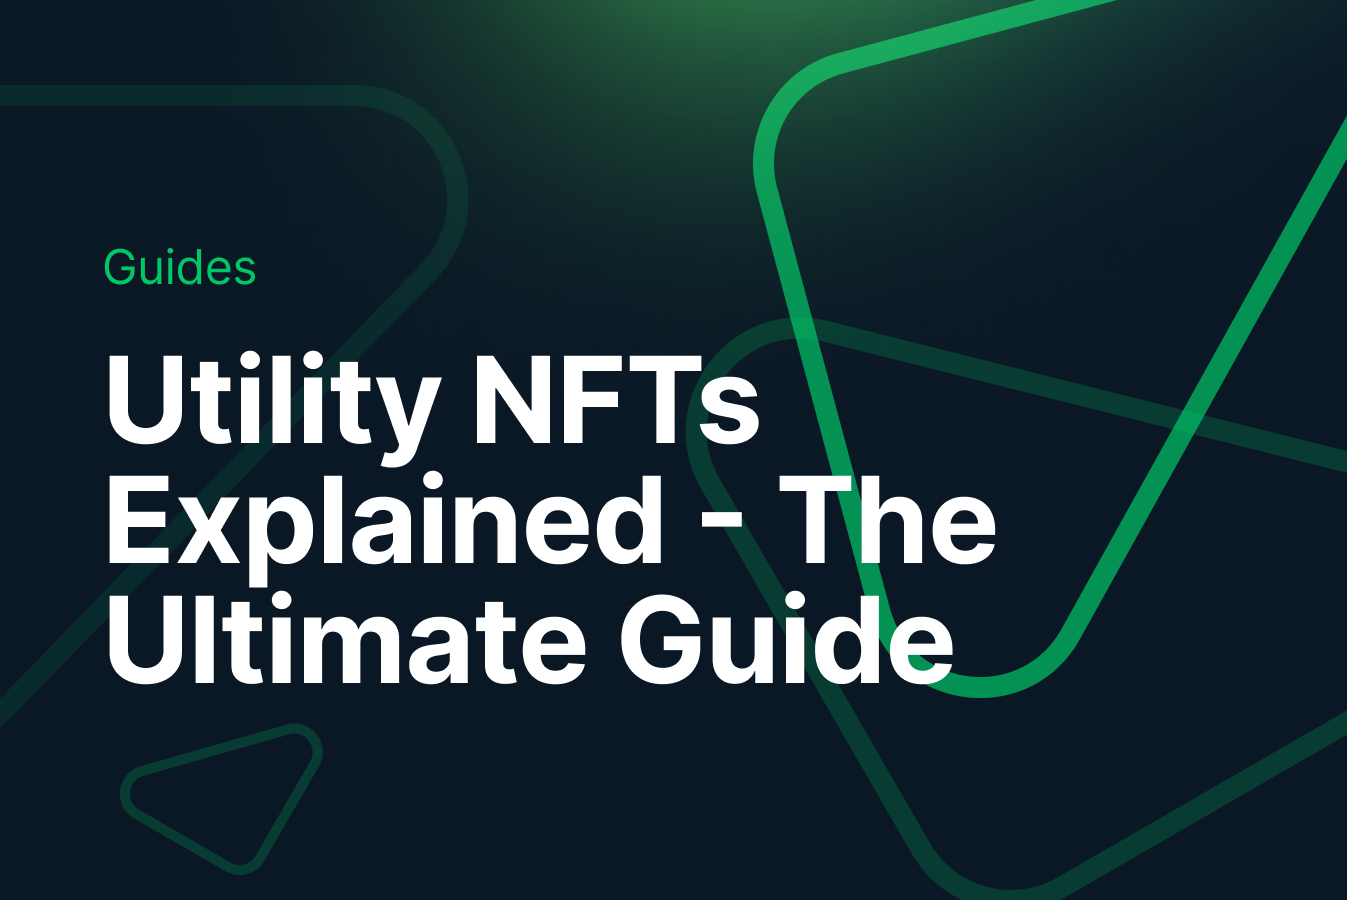 Utility NFTs Explained - The Ultimate Guide